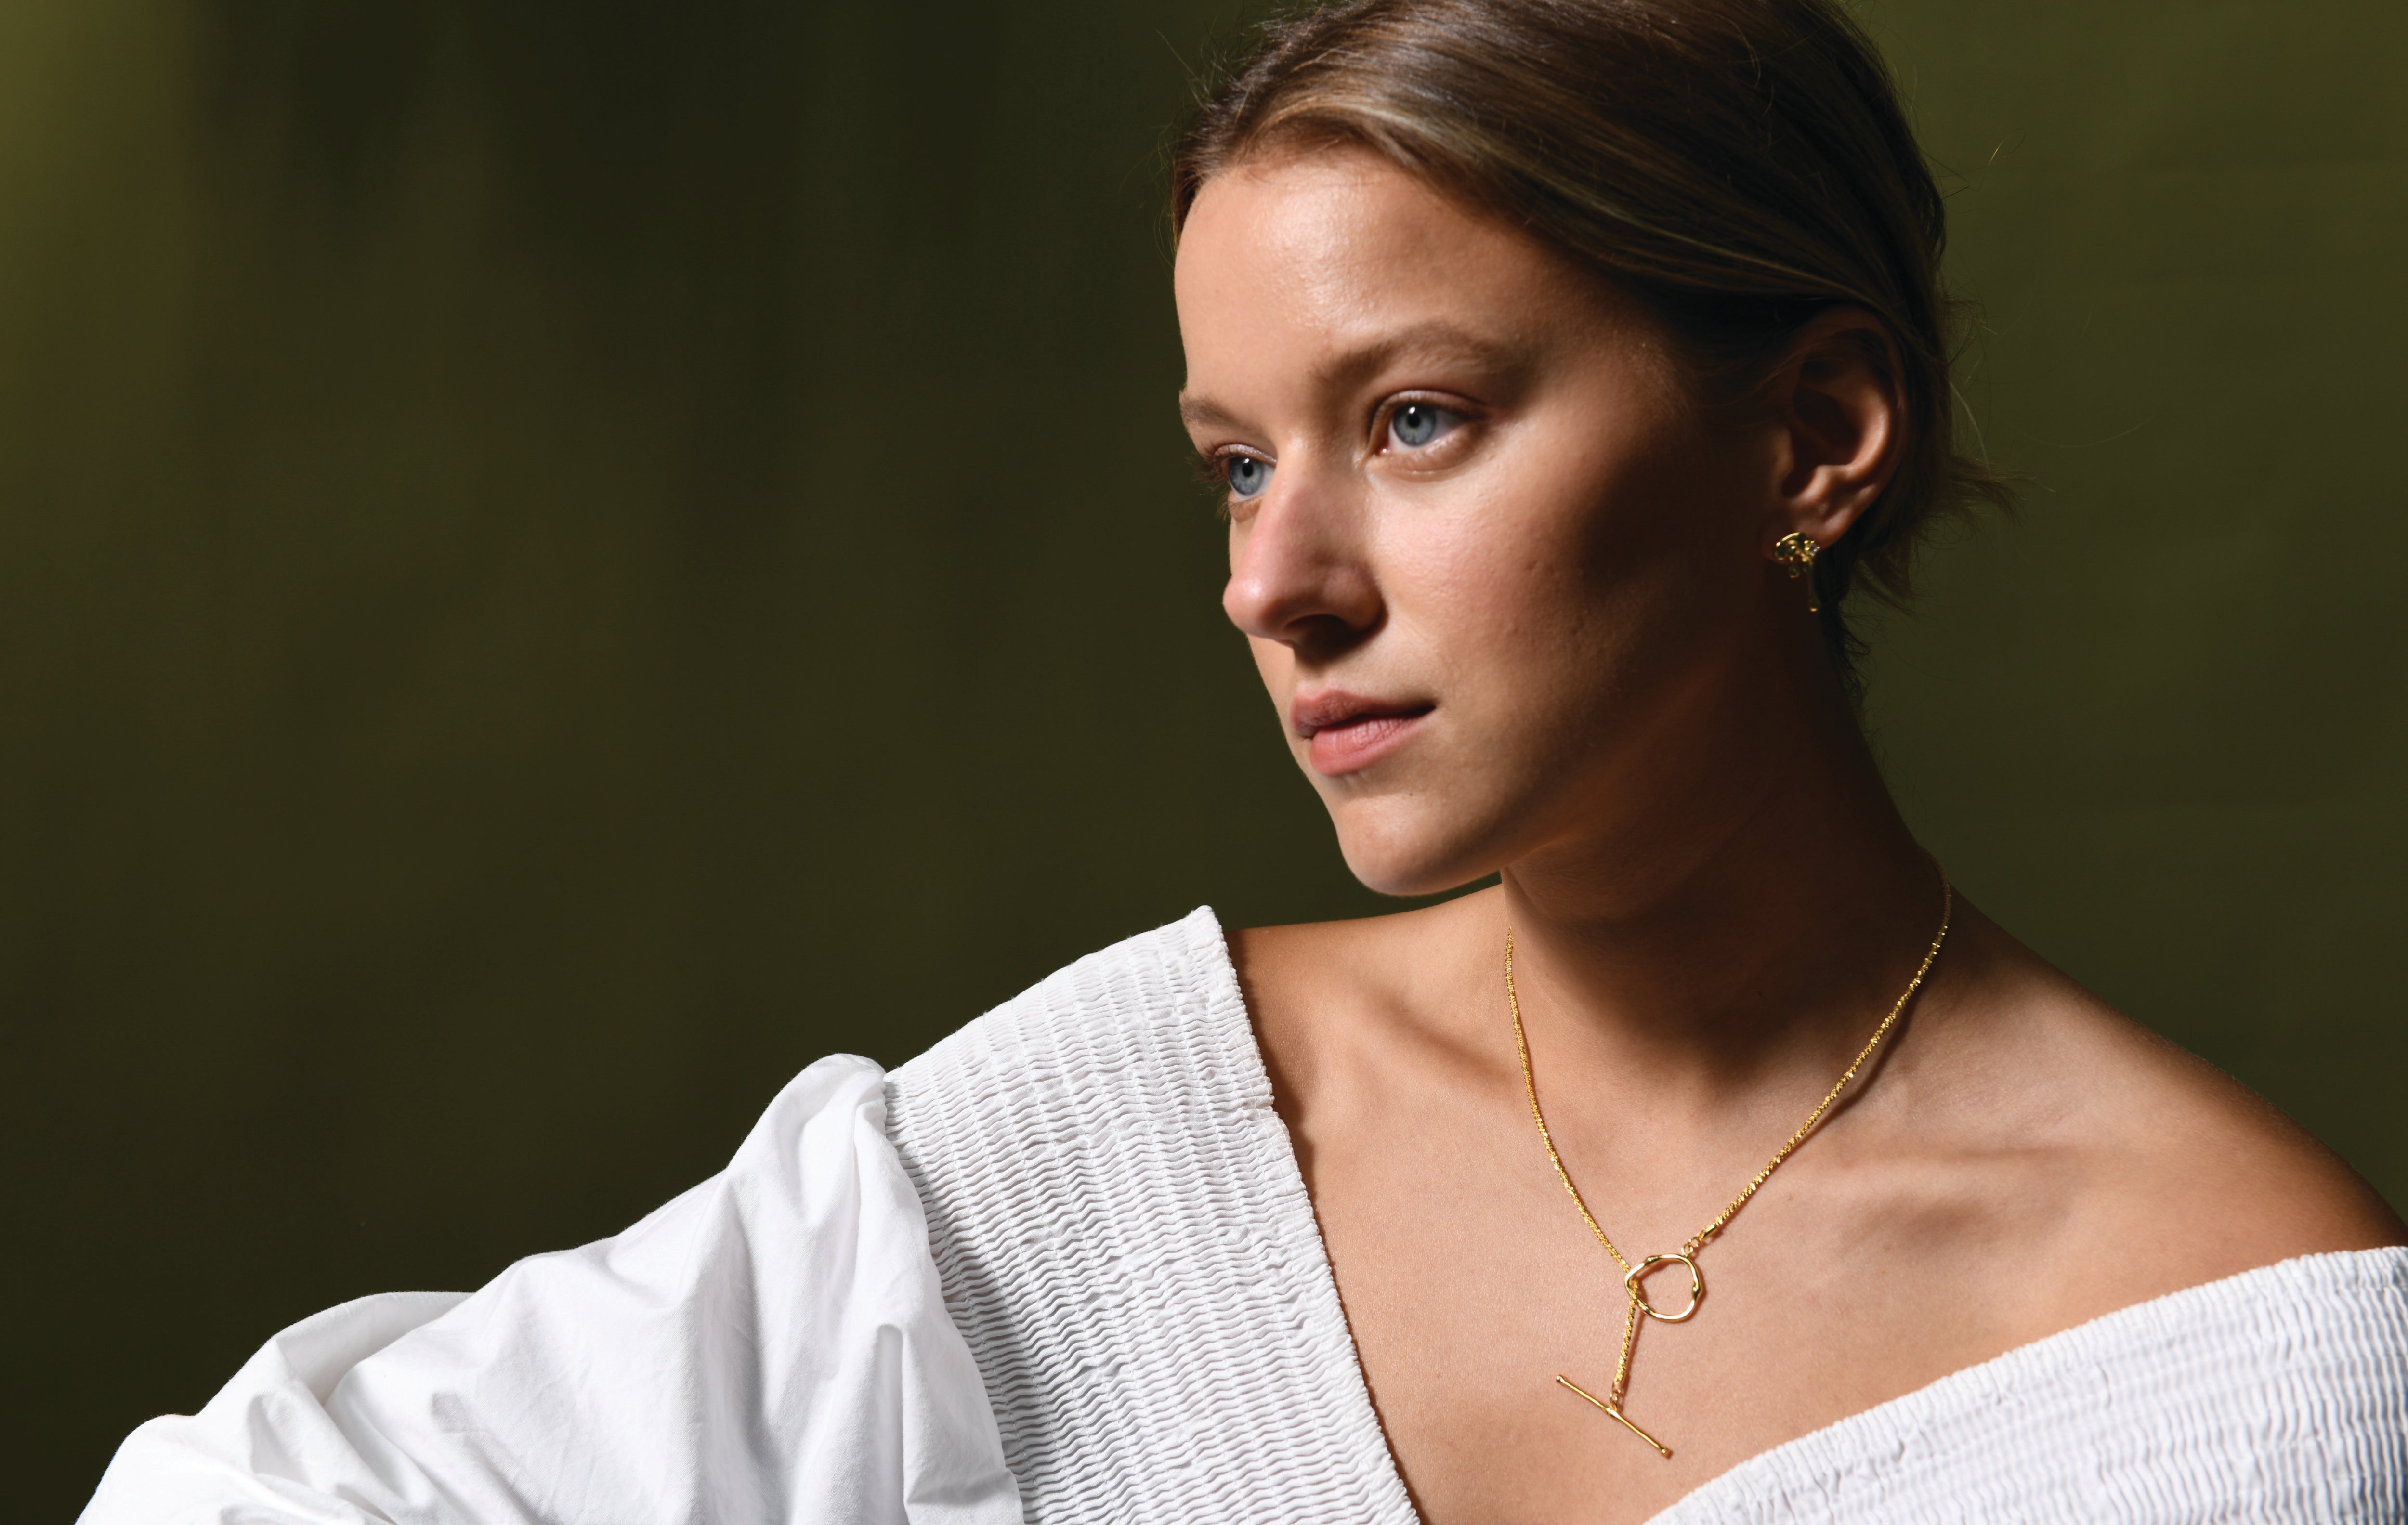 A female model wearing a gold plated necklace. The necklace has a dainty gold chain with a toggle clasp which can be worn at the front or back.